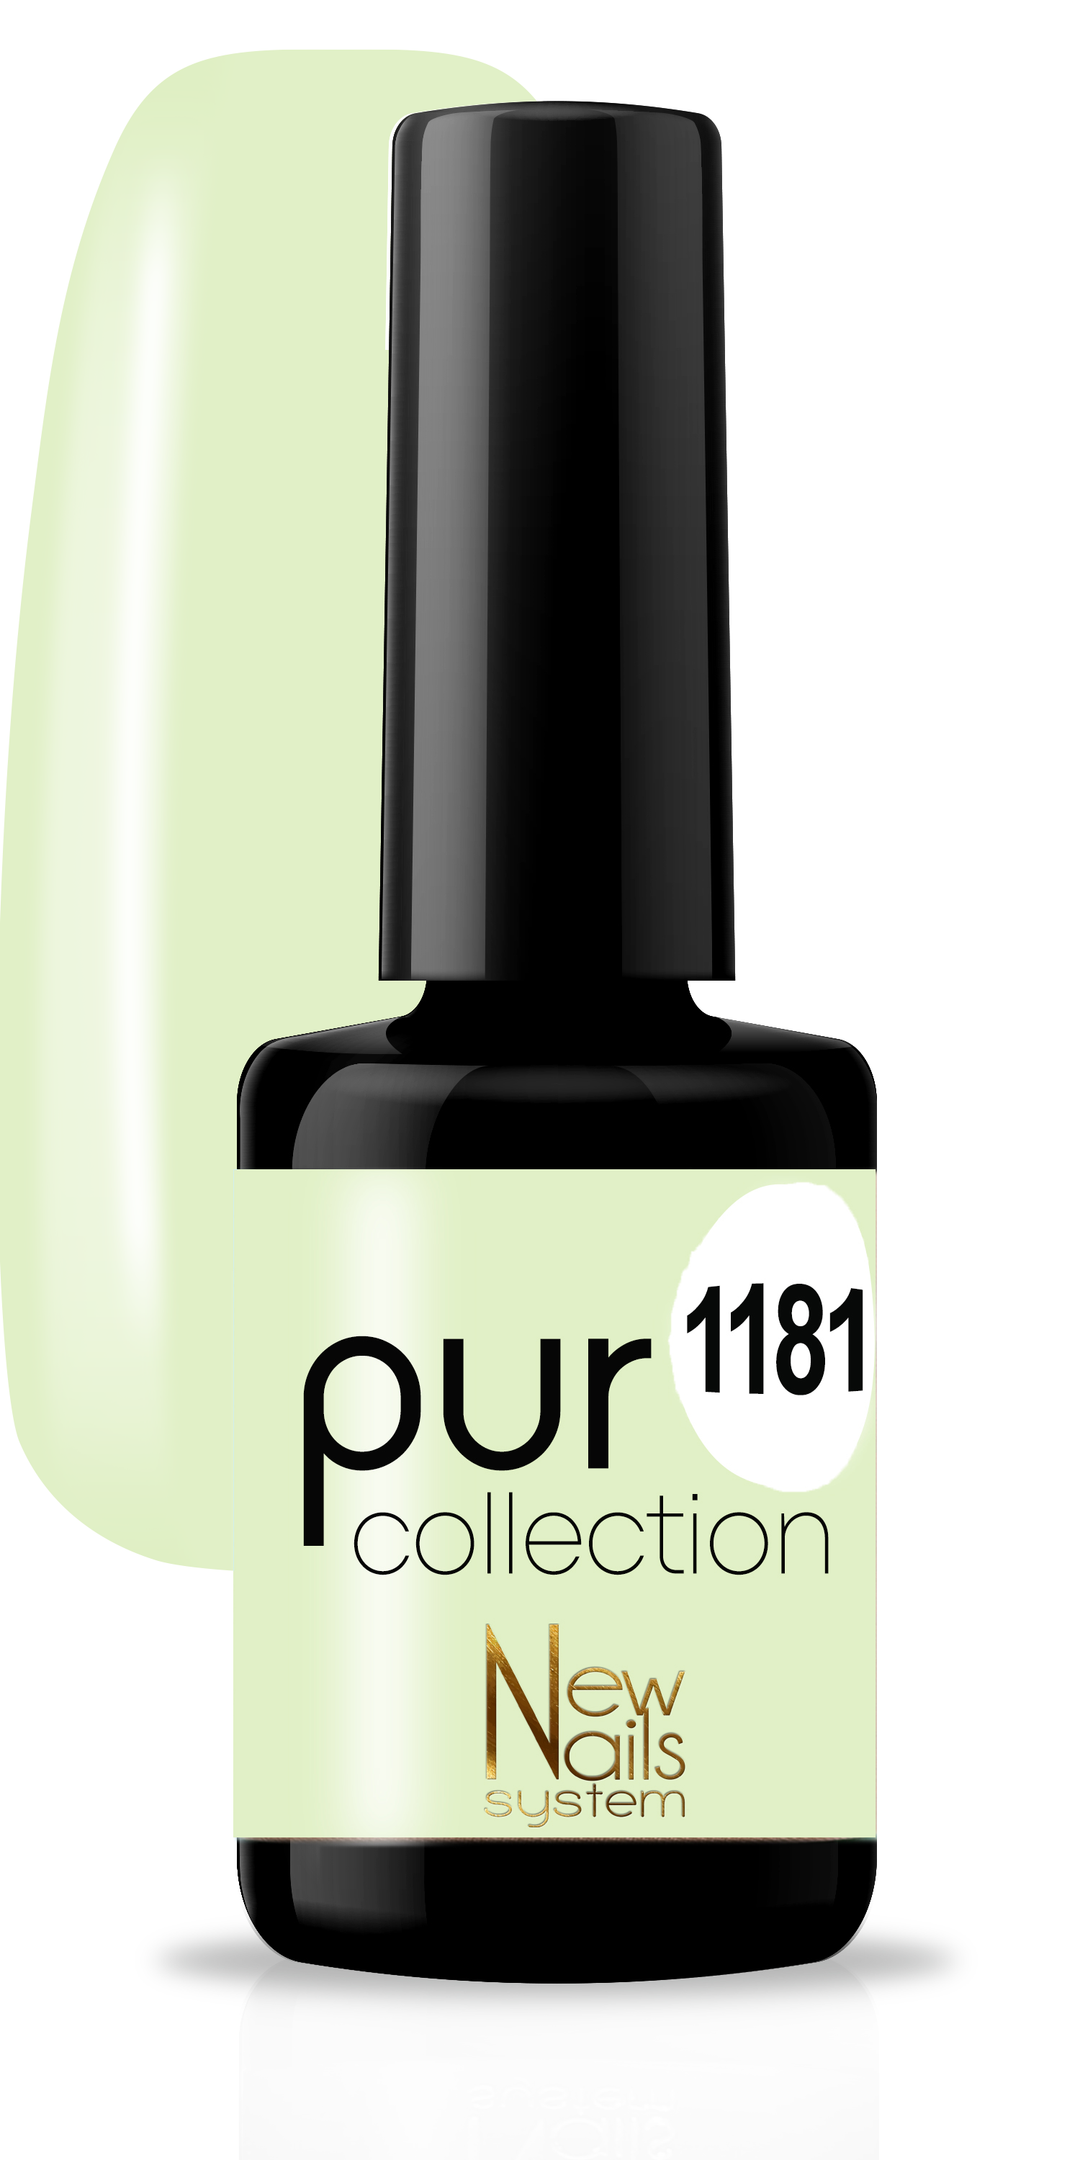 Puro collection 1181 semi-permanent Sweet Pastel color 5ml